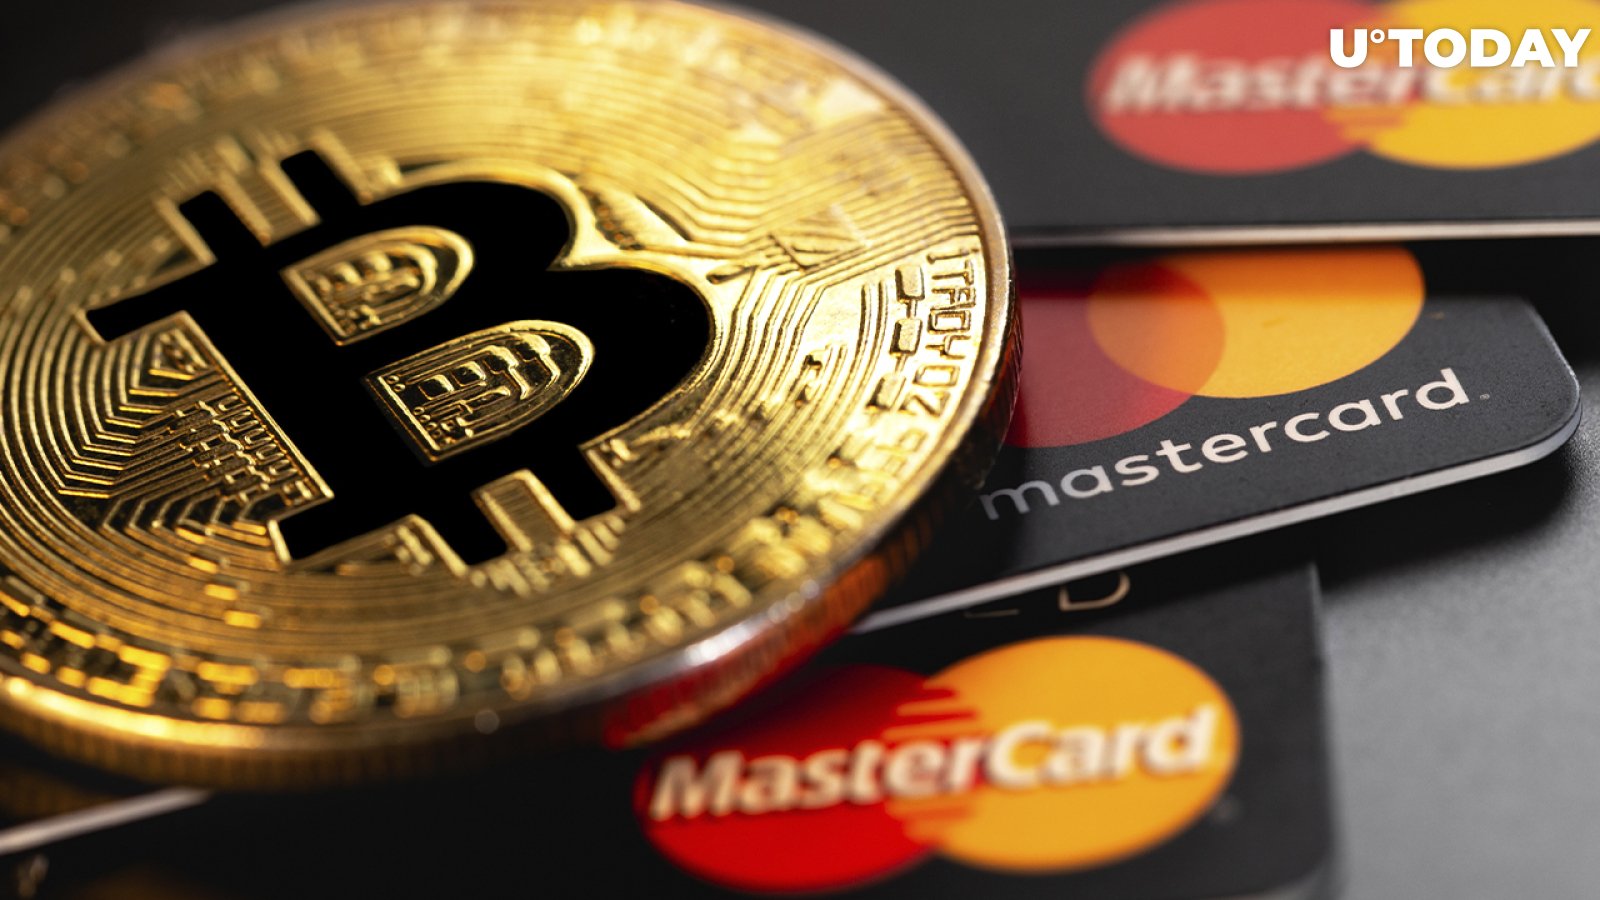 Mastercard Plans on Hiring 500 More Cryptocurrency Specialists, Aims to Help Banks with Crypto Adoption